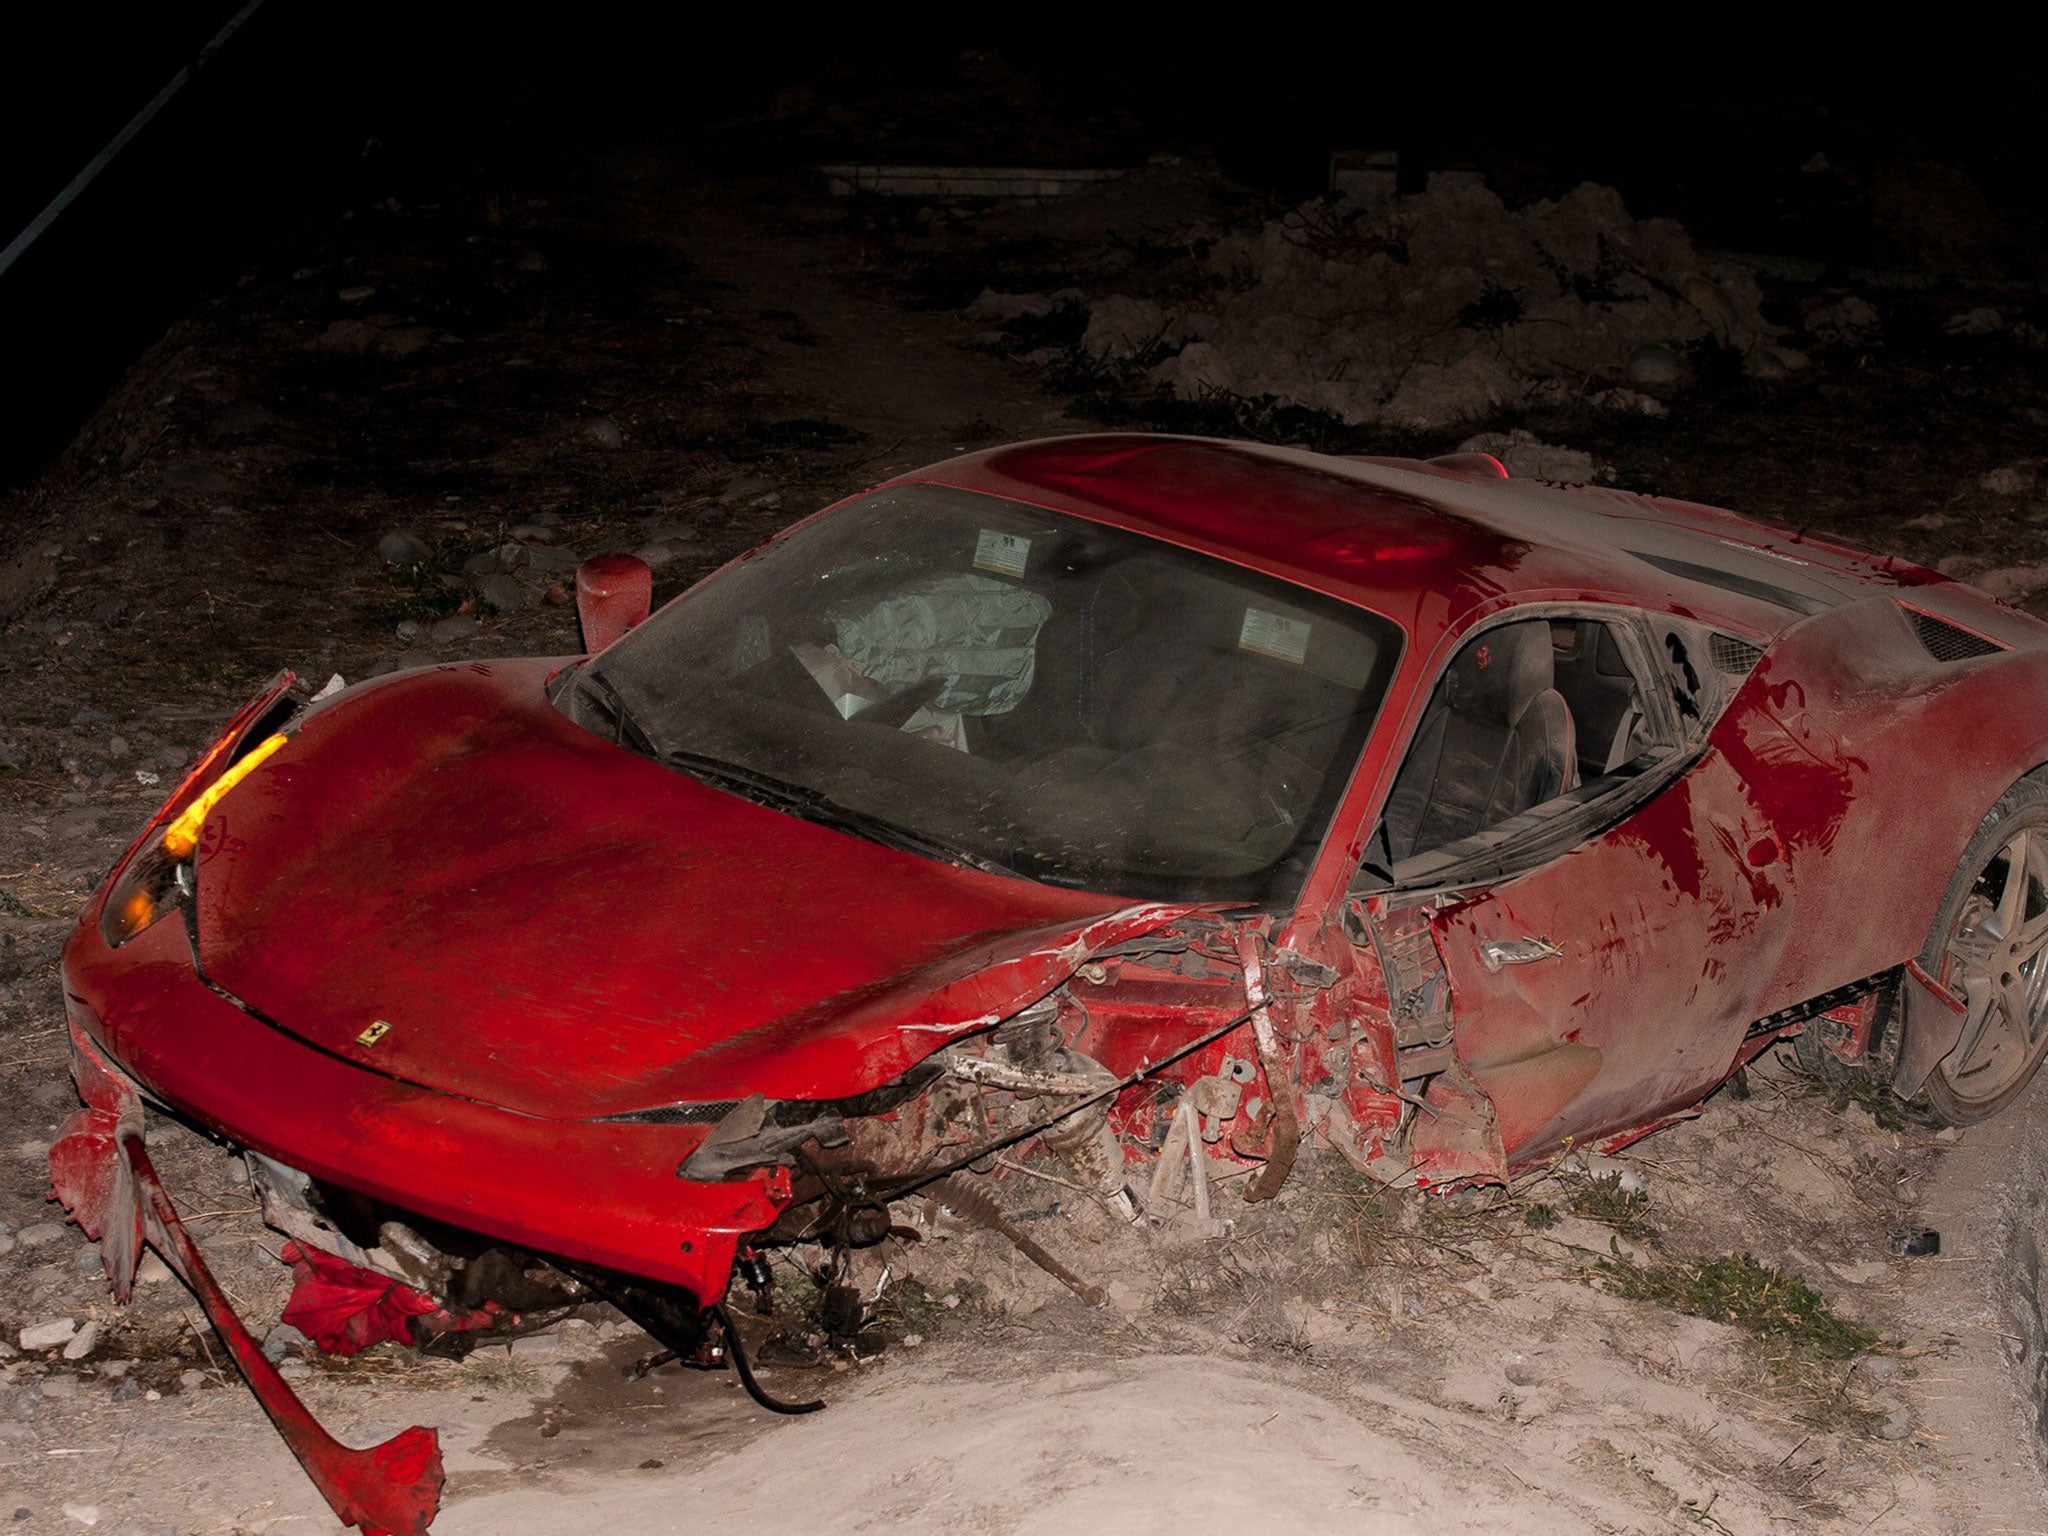 The full extent of the damage to the Ferrari can be seen